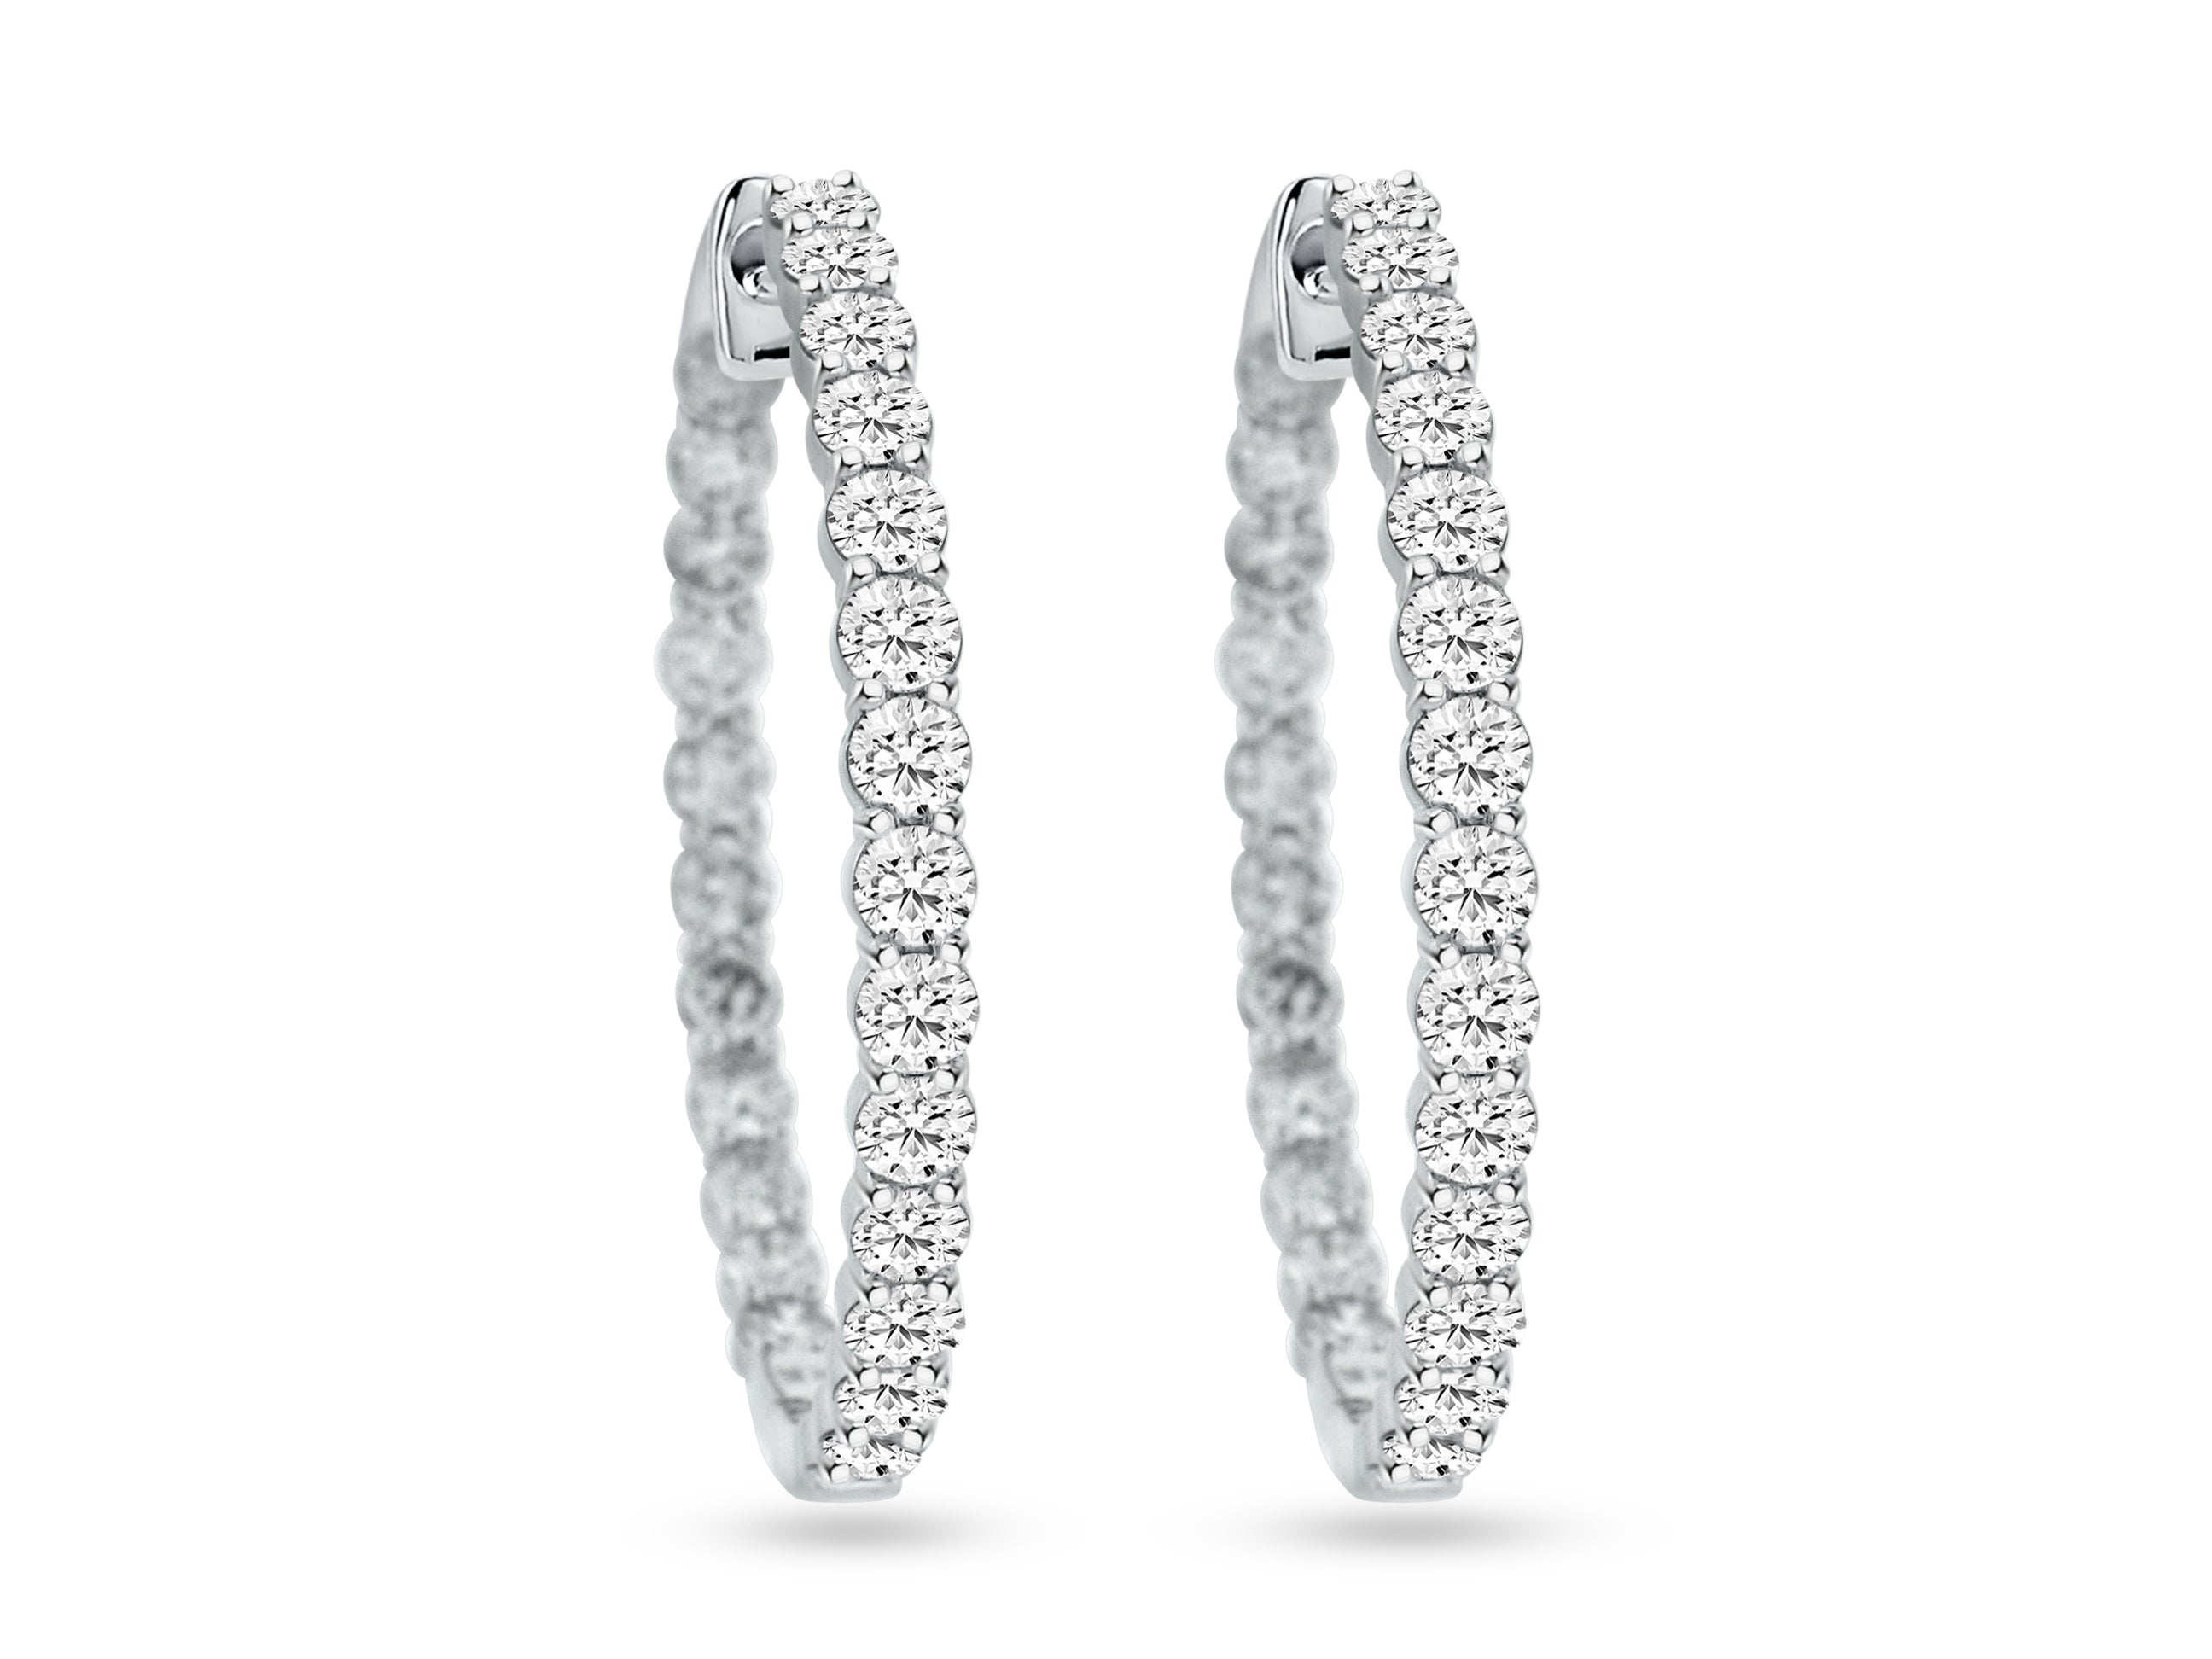 MULLOYS PRIVE'14K WHITE GOLD 7.95CT SI CLARITY G-H COLOR  DIAMOND HOOPS